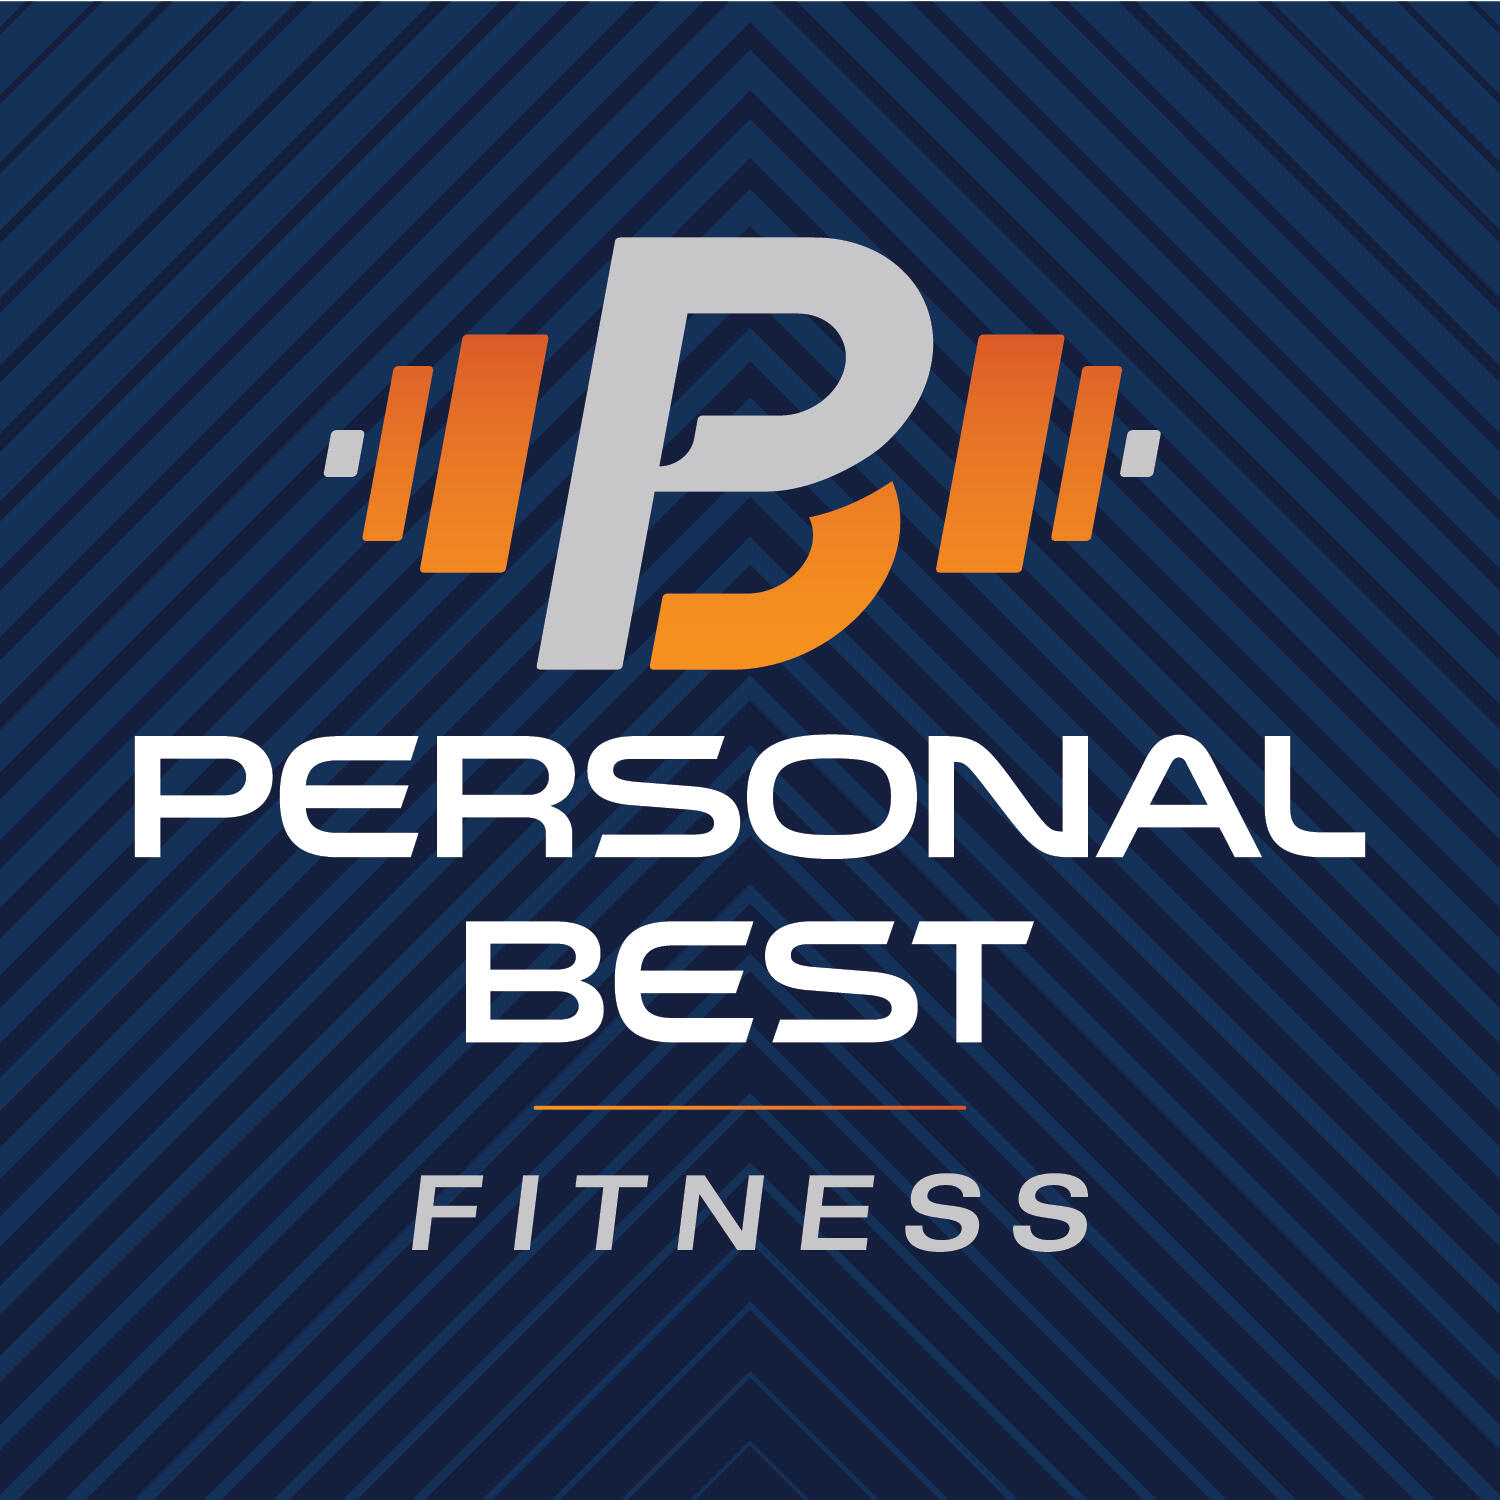 Personal training and consultation